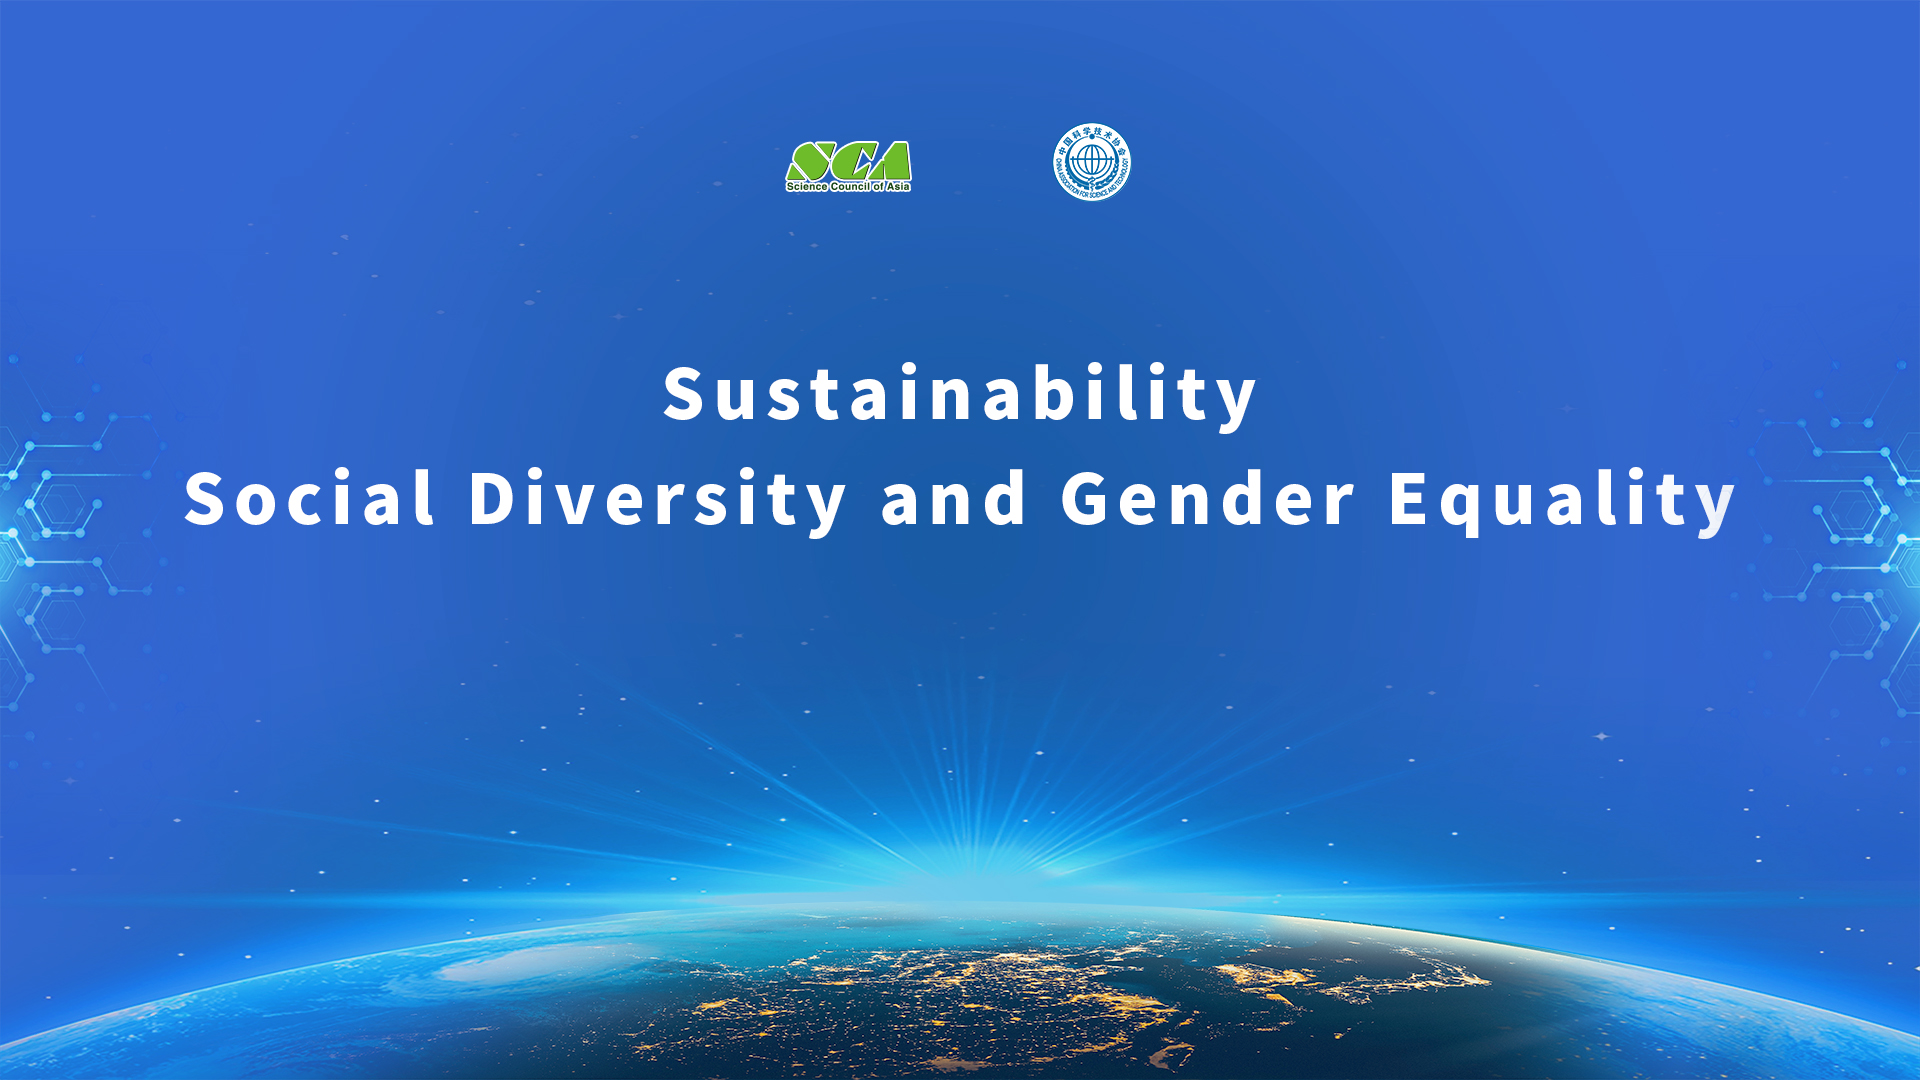 Session 1: Sustainability, Social Diversity and Gender Equality